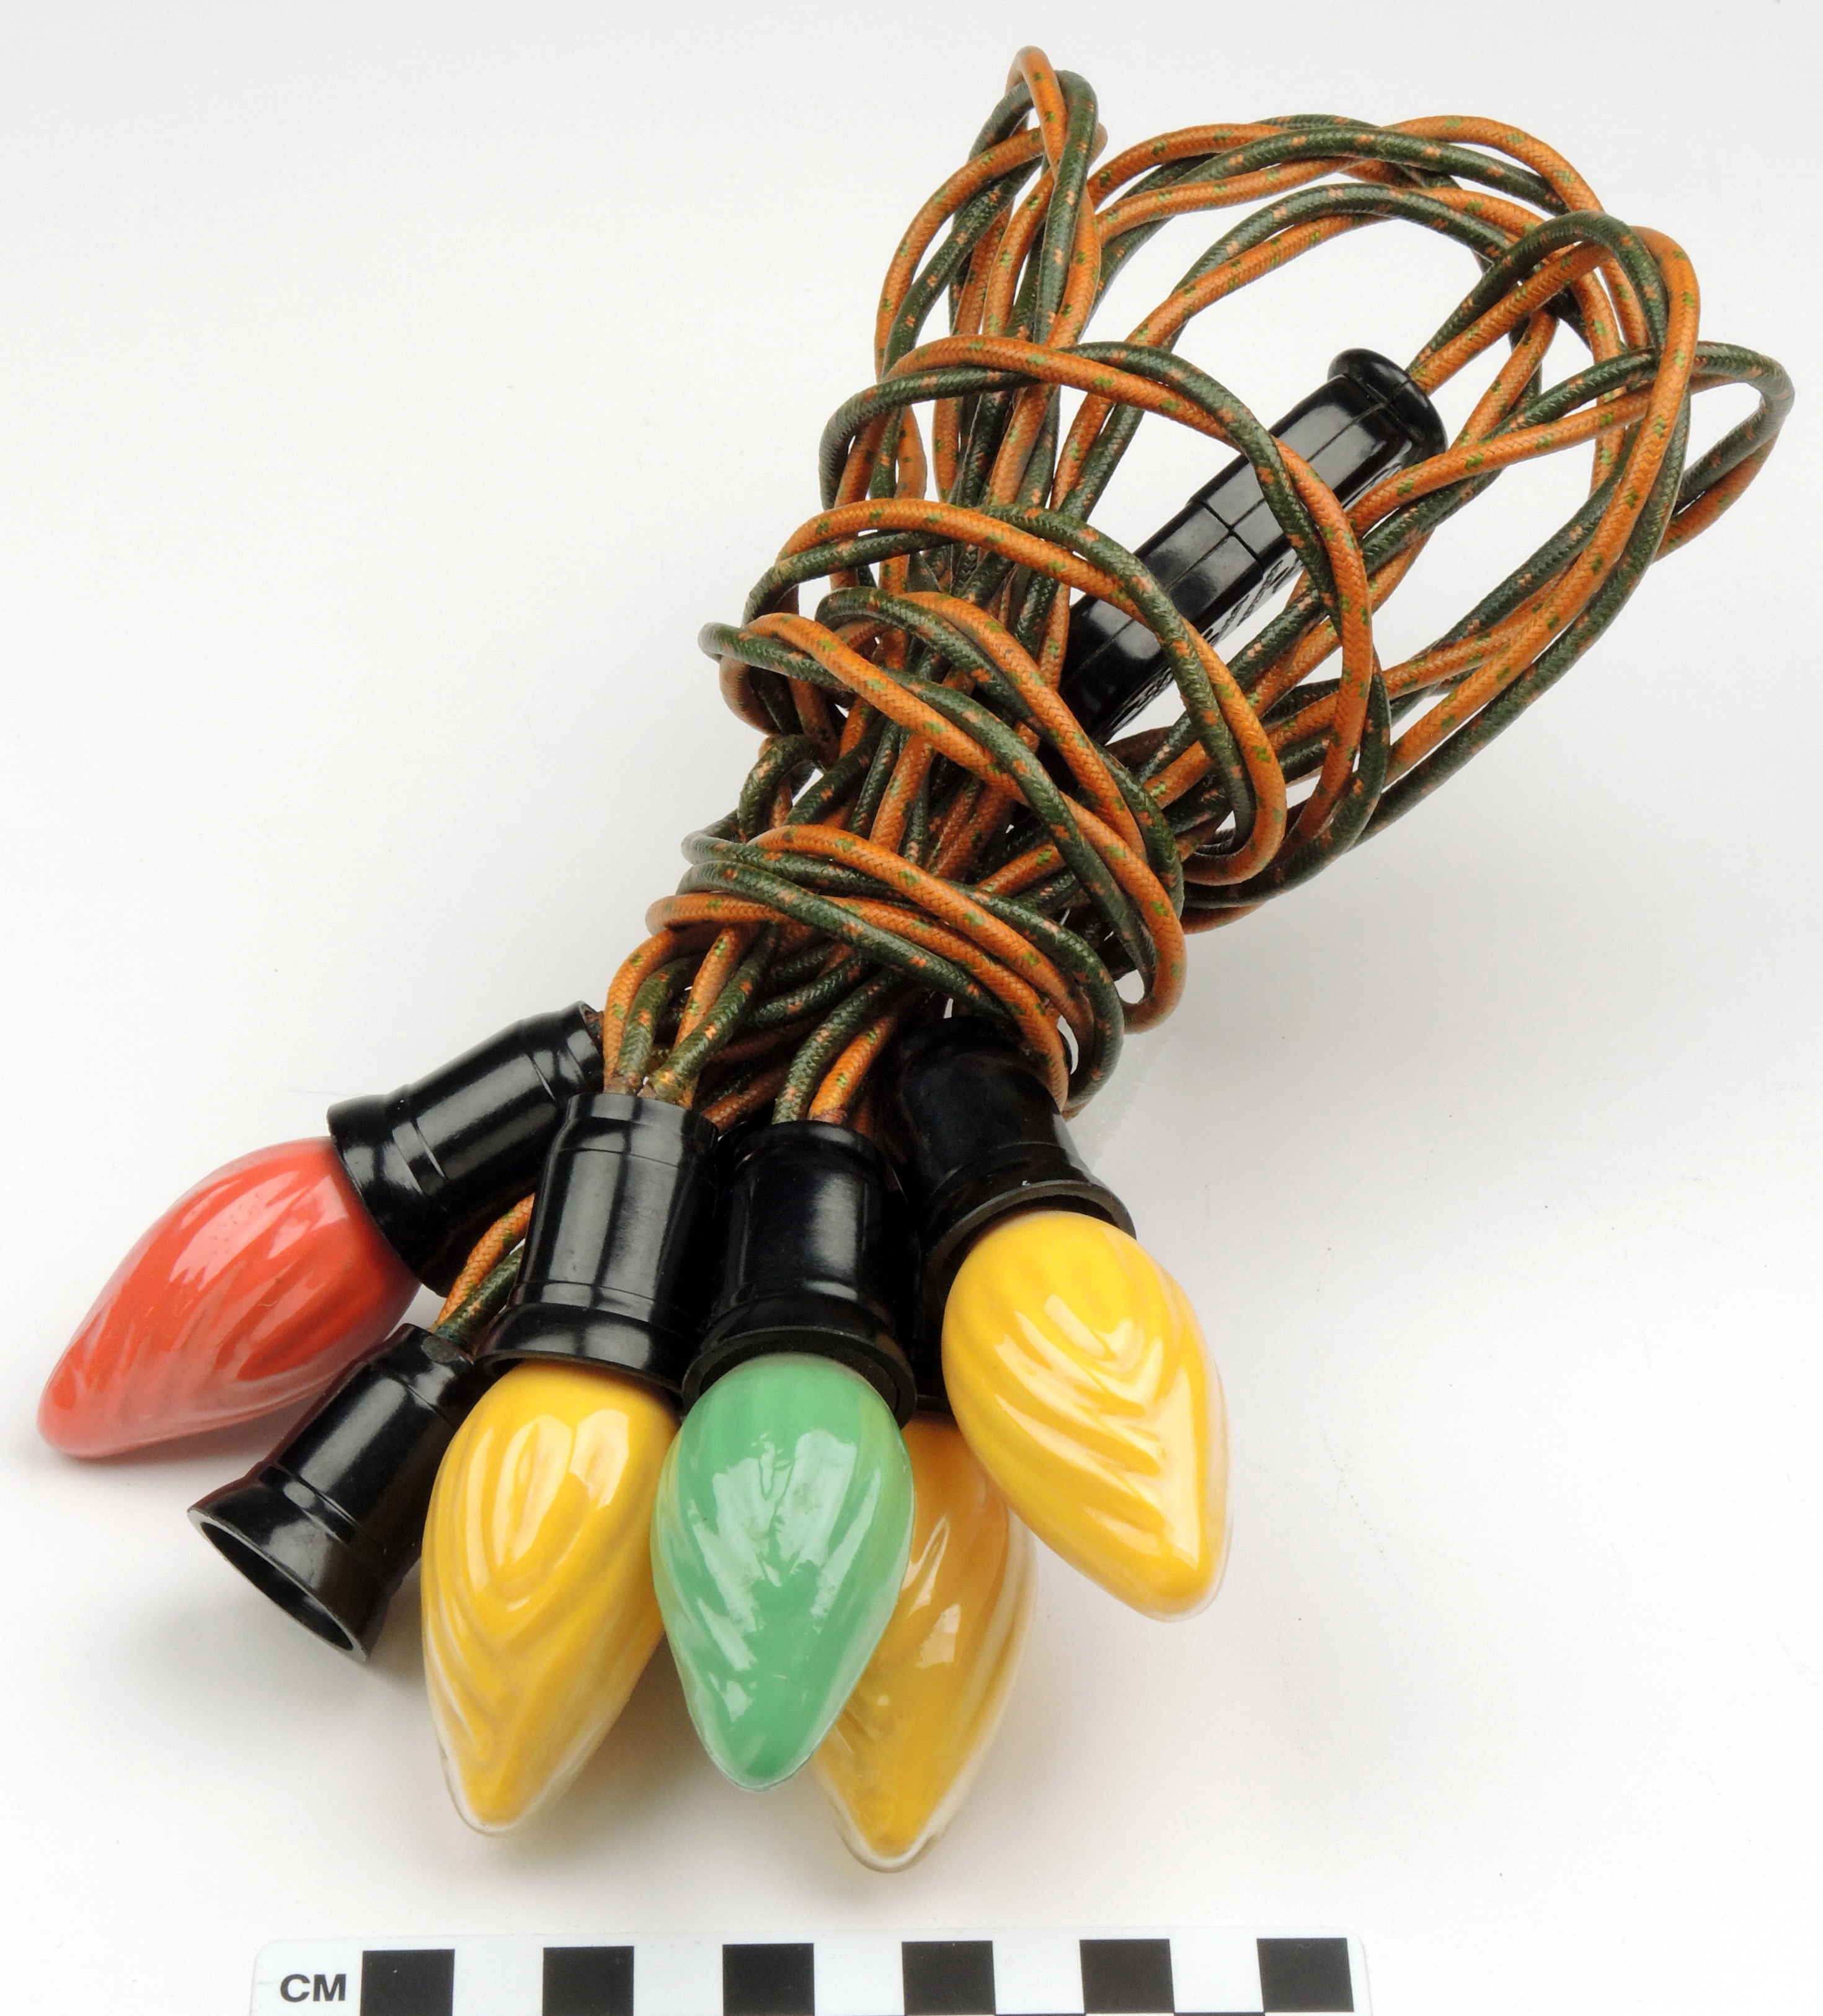 Photo of a string of Christmas lights. The yellow and green cord is gathered into a tidy bundle, with the bulbs at one end. There are five glass bulbs in the shape of a small rounded flame. There are 3 yellow, 1 green, and 1 red bulb in the bunch, with a black plastic base that connects them to the electrical cord.